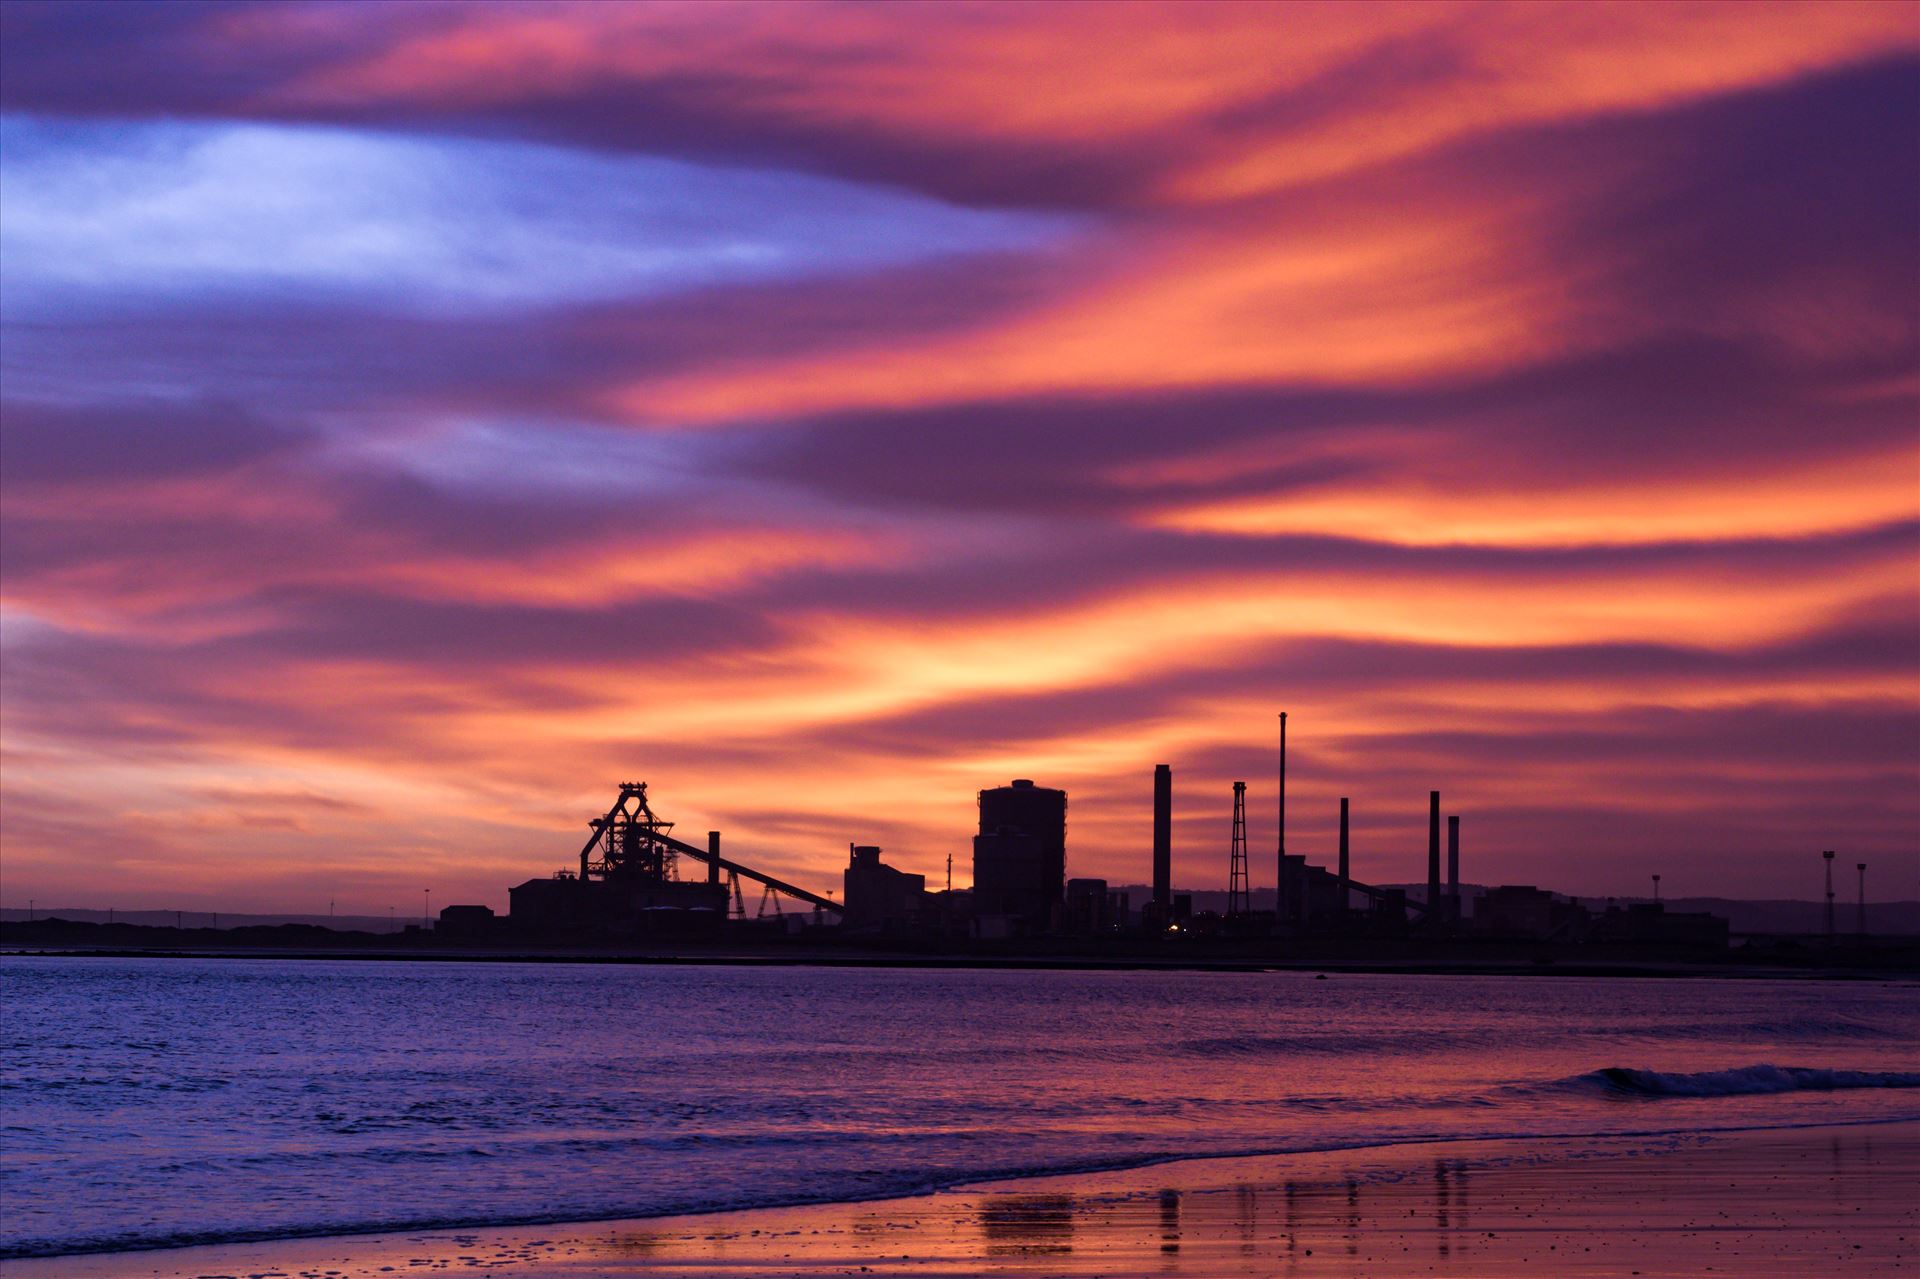 SSI Redcar Steel Works Sunrise, just the hint of blue - Taken on the 2/01/18 on a very cold Seaton Beach looking over the river to SSI Redcar Steel Works. with a hint of Blue skys by AJ Stoves Photography